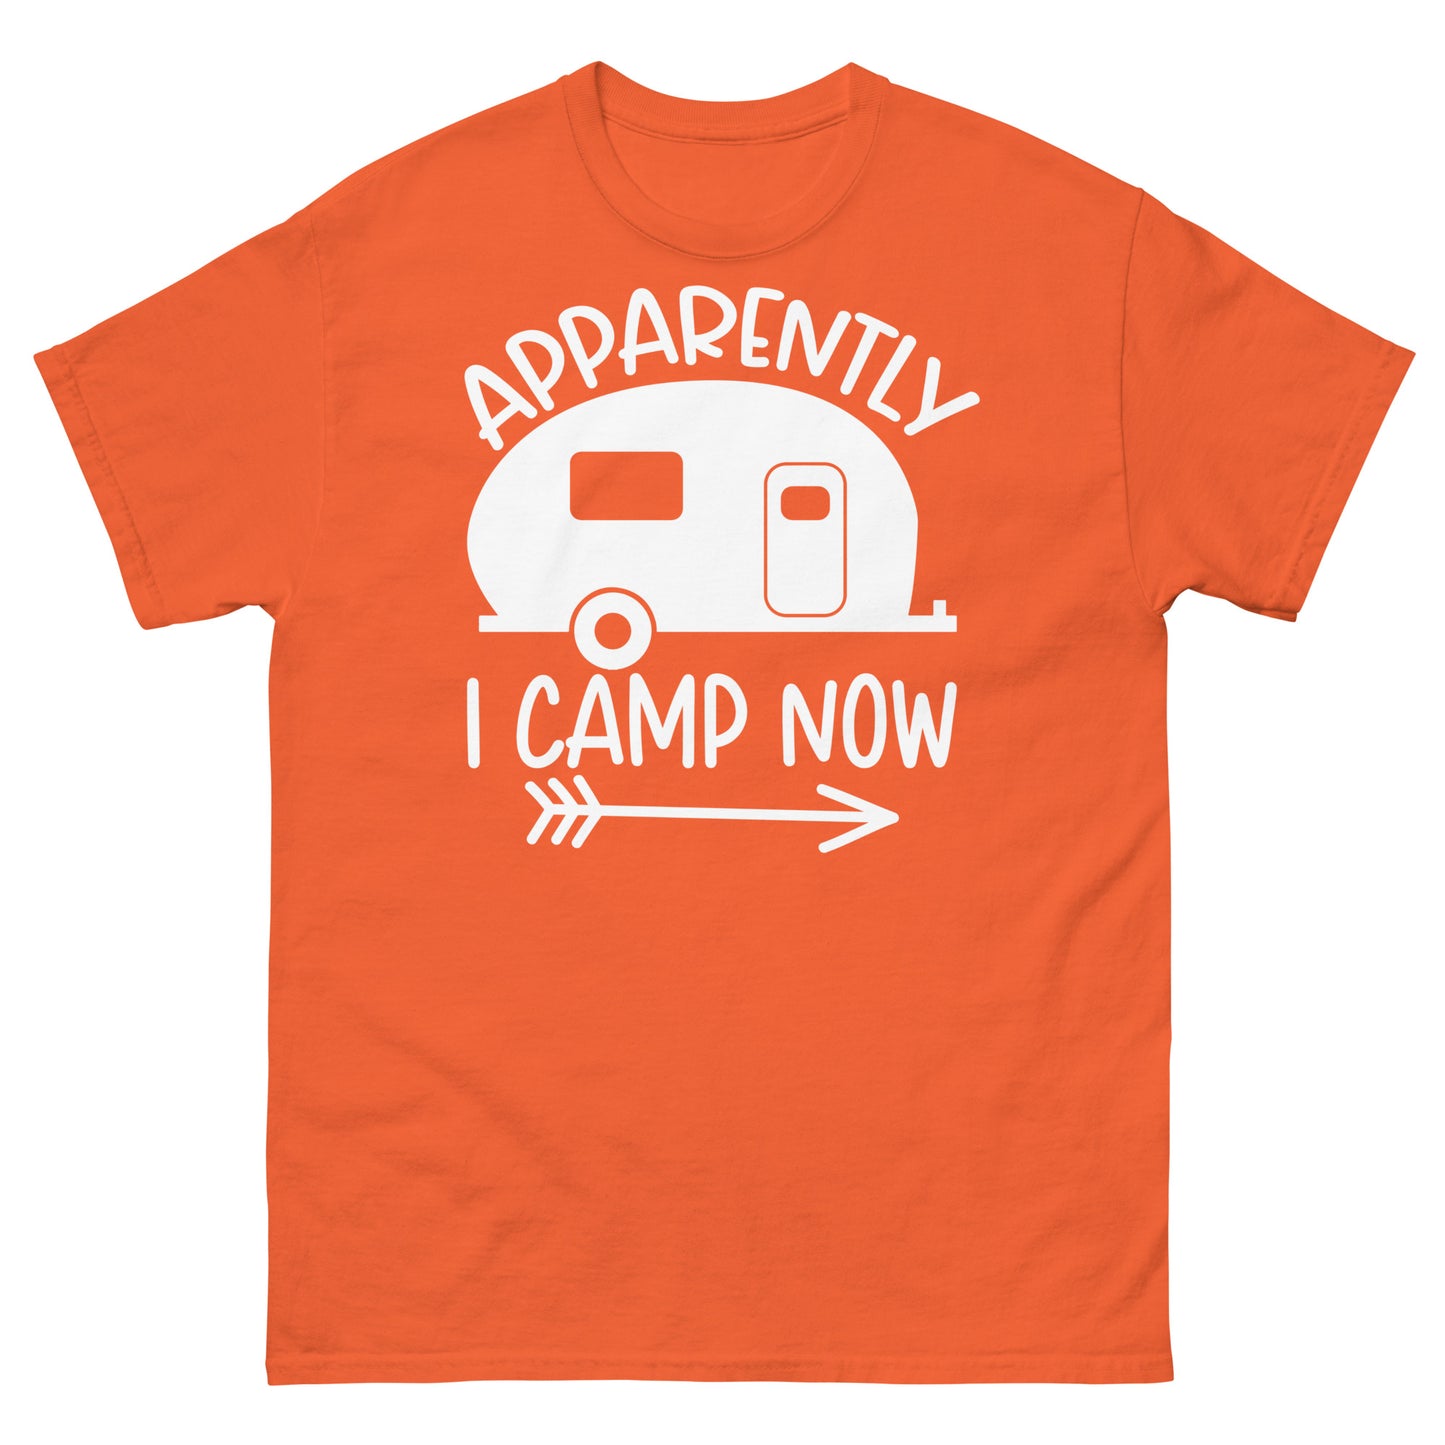 apparently I camp now - classic tee